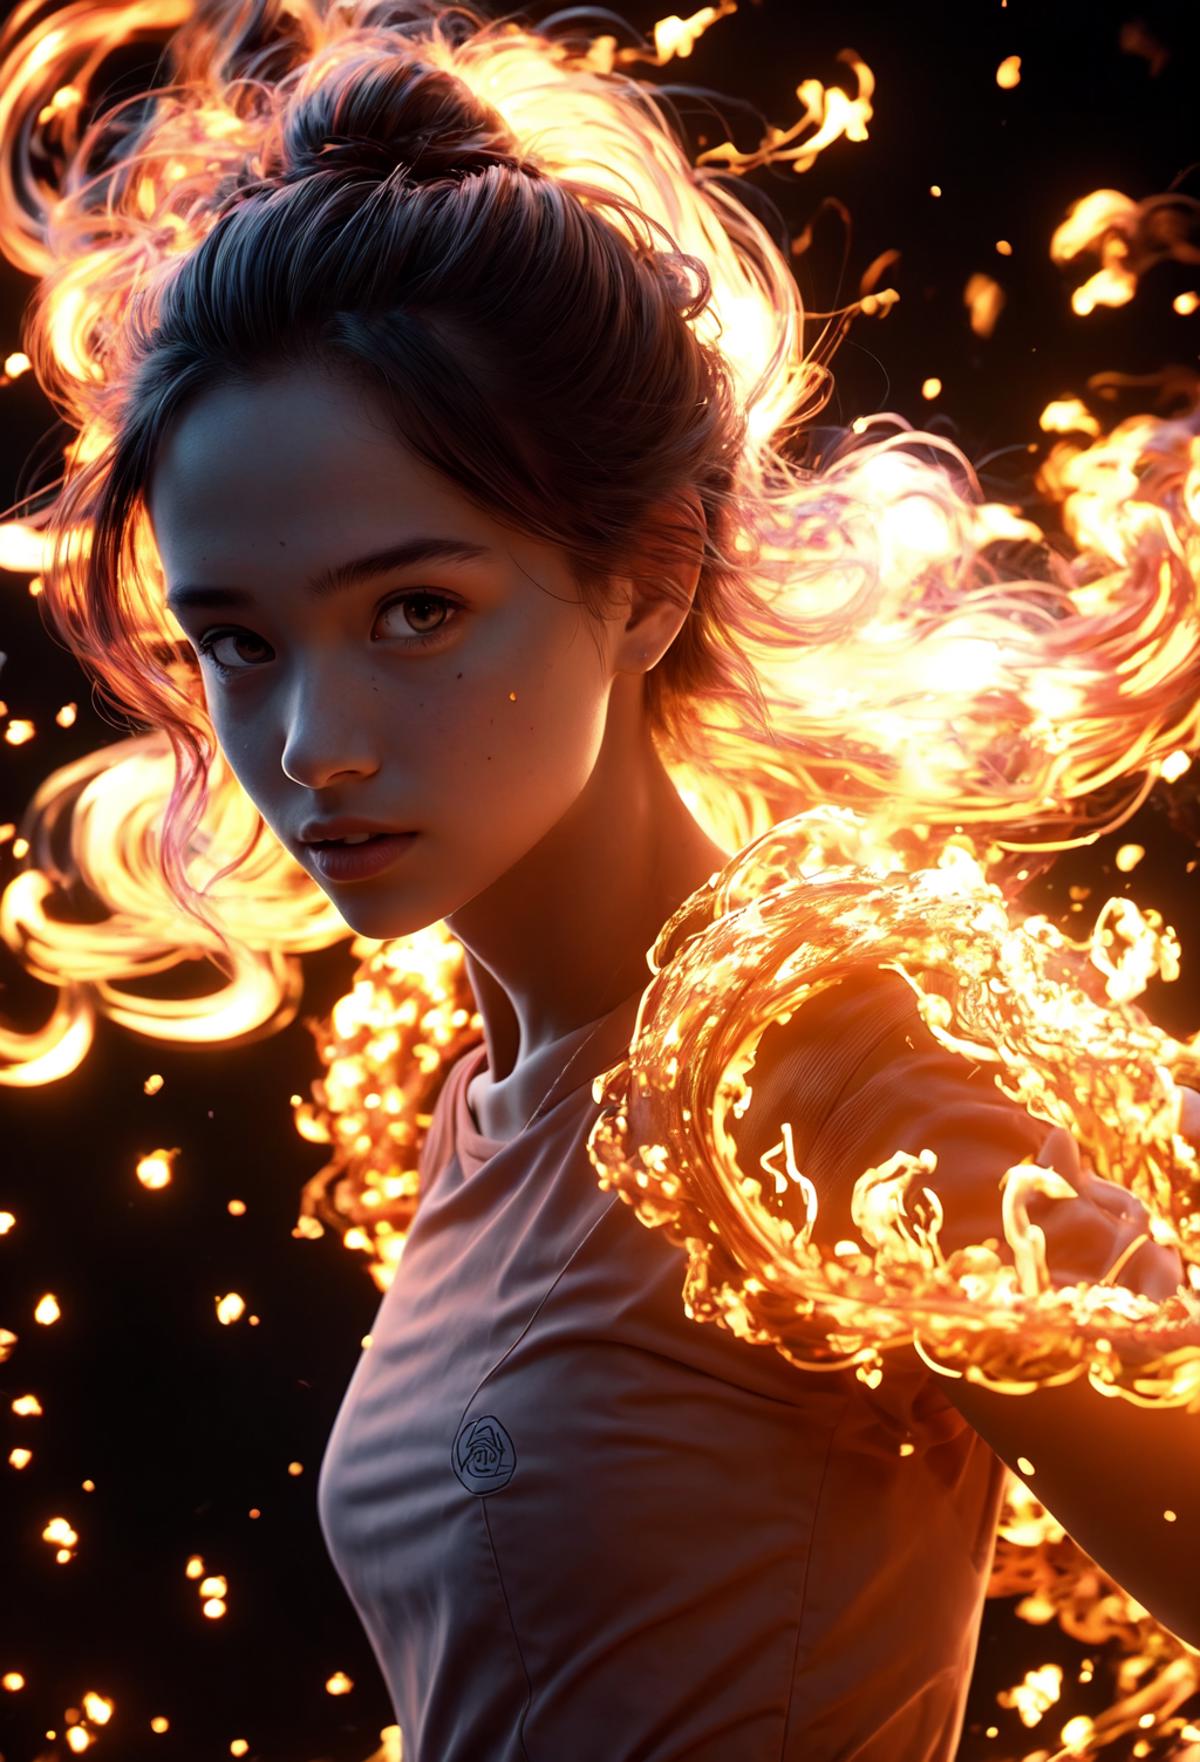 A woman with fire in her hair and holding a flaming ring in her hand.